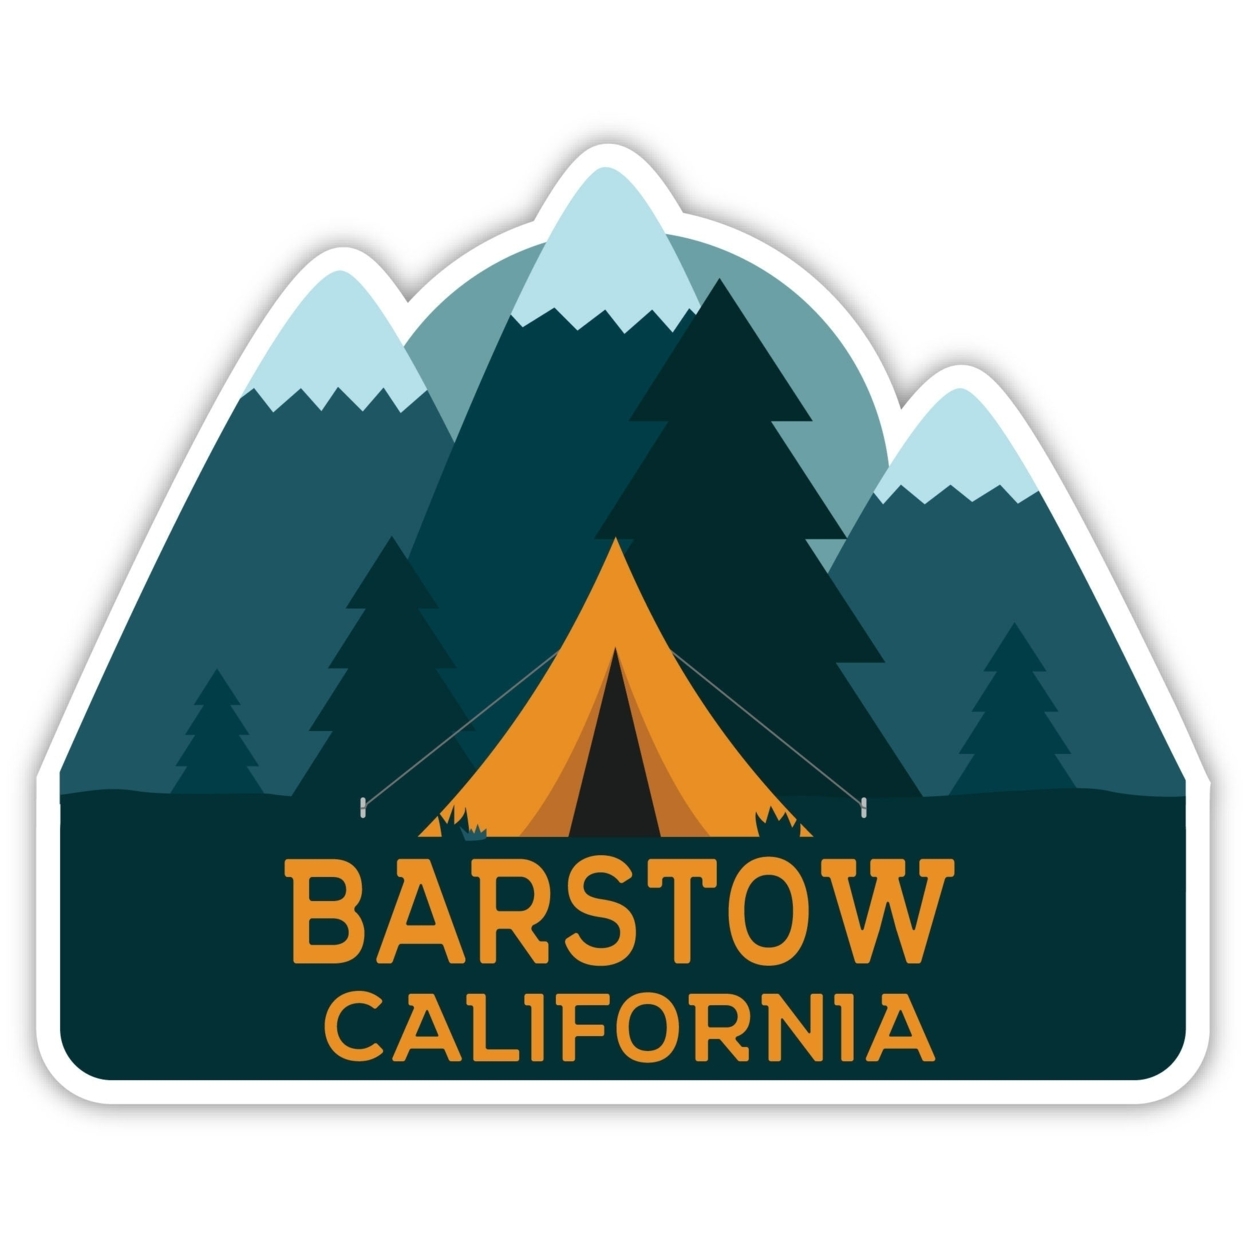 Barstow California Souvenir Decorative Stickers (Choose Theme And Size) - 4-Pack, 6-Inch, Tent